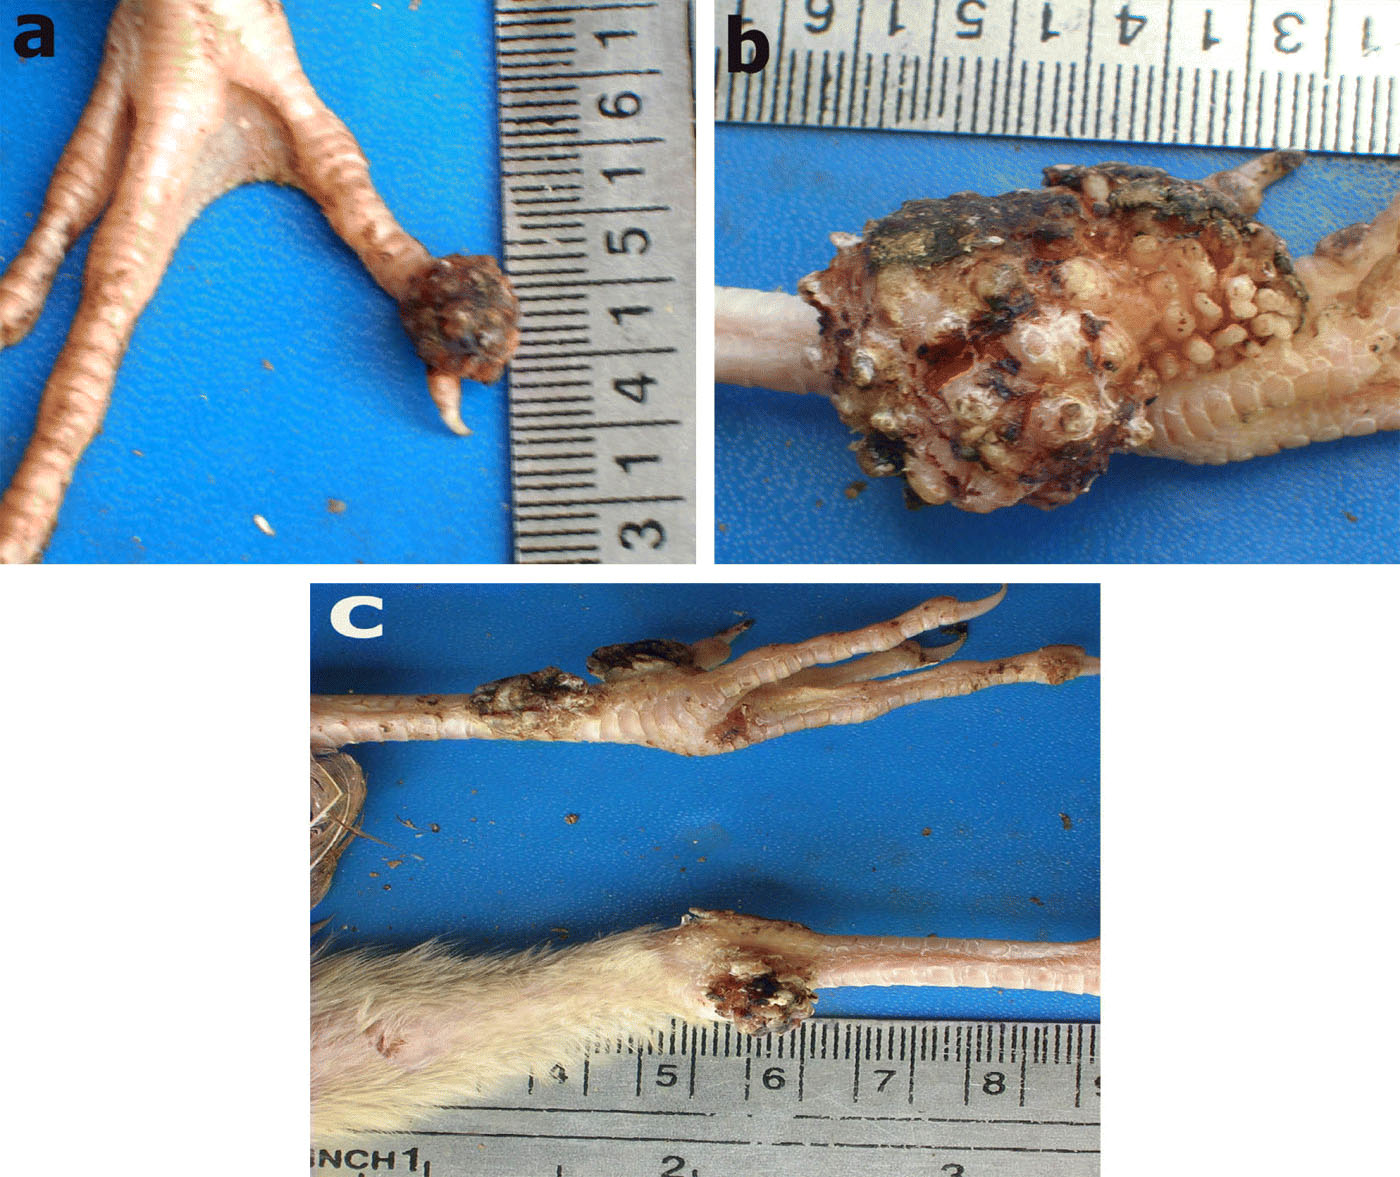 Figure 3.  Gross lesions of avian pox in peafowl chicks on the leg and toe. 3a: a nodular growth on one of the toes. 3b: leg lesions were much larger in some of the peafowl chicks, lesion measured 3.25 cm (length) x 2 cm (width). 3c: both of the legs were having variably sized lesions on various parts (i.e. knee joint, shaft, fingers, toe, etc.).